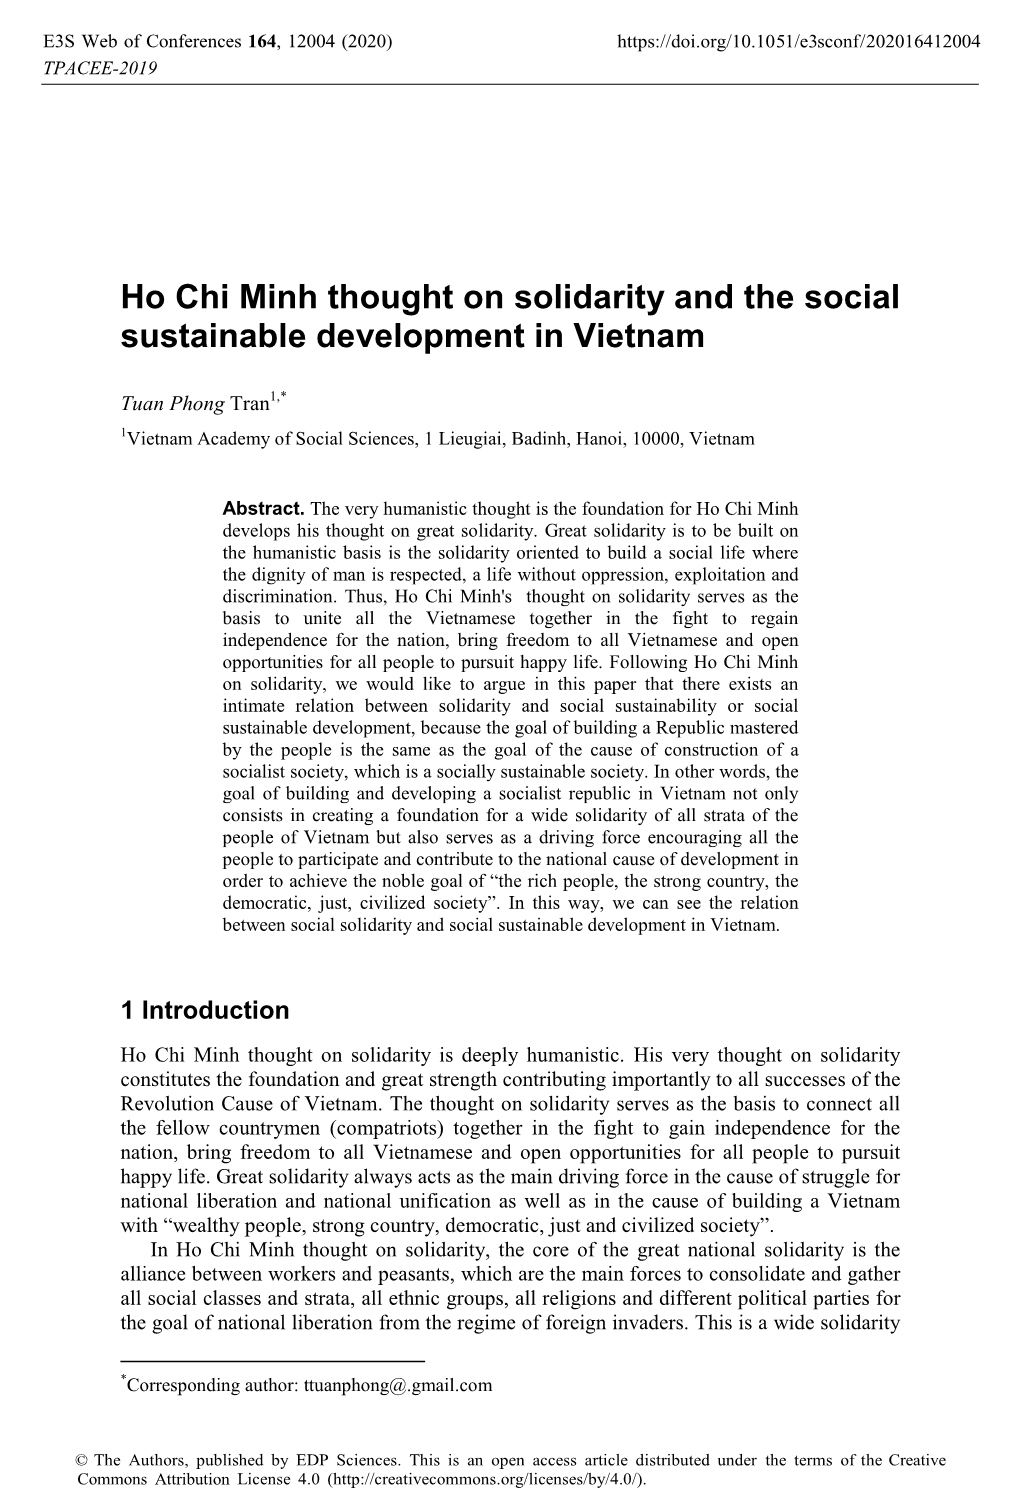 Ho Chi Minh Thought on Solidarity and the Social Sustainable Development in Vietnam